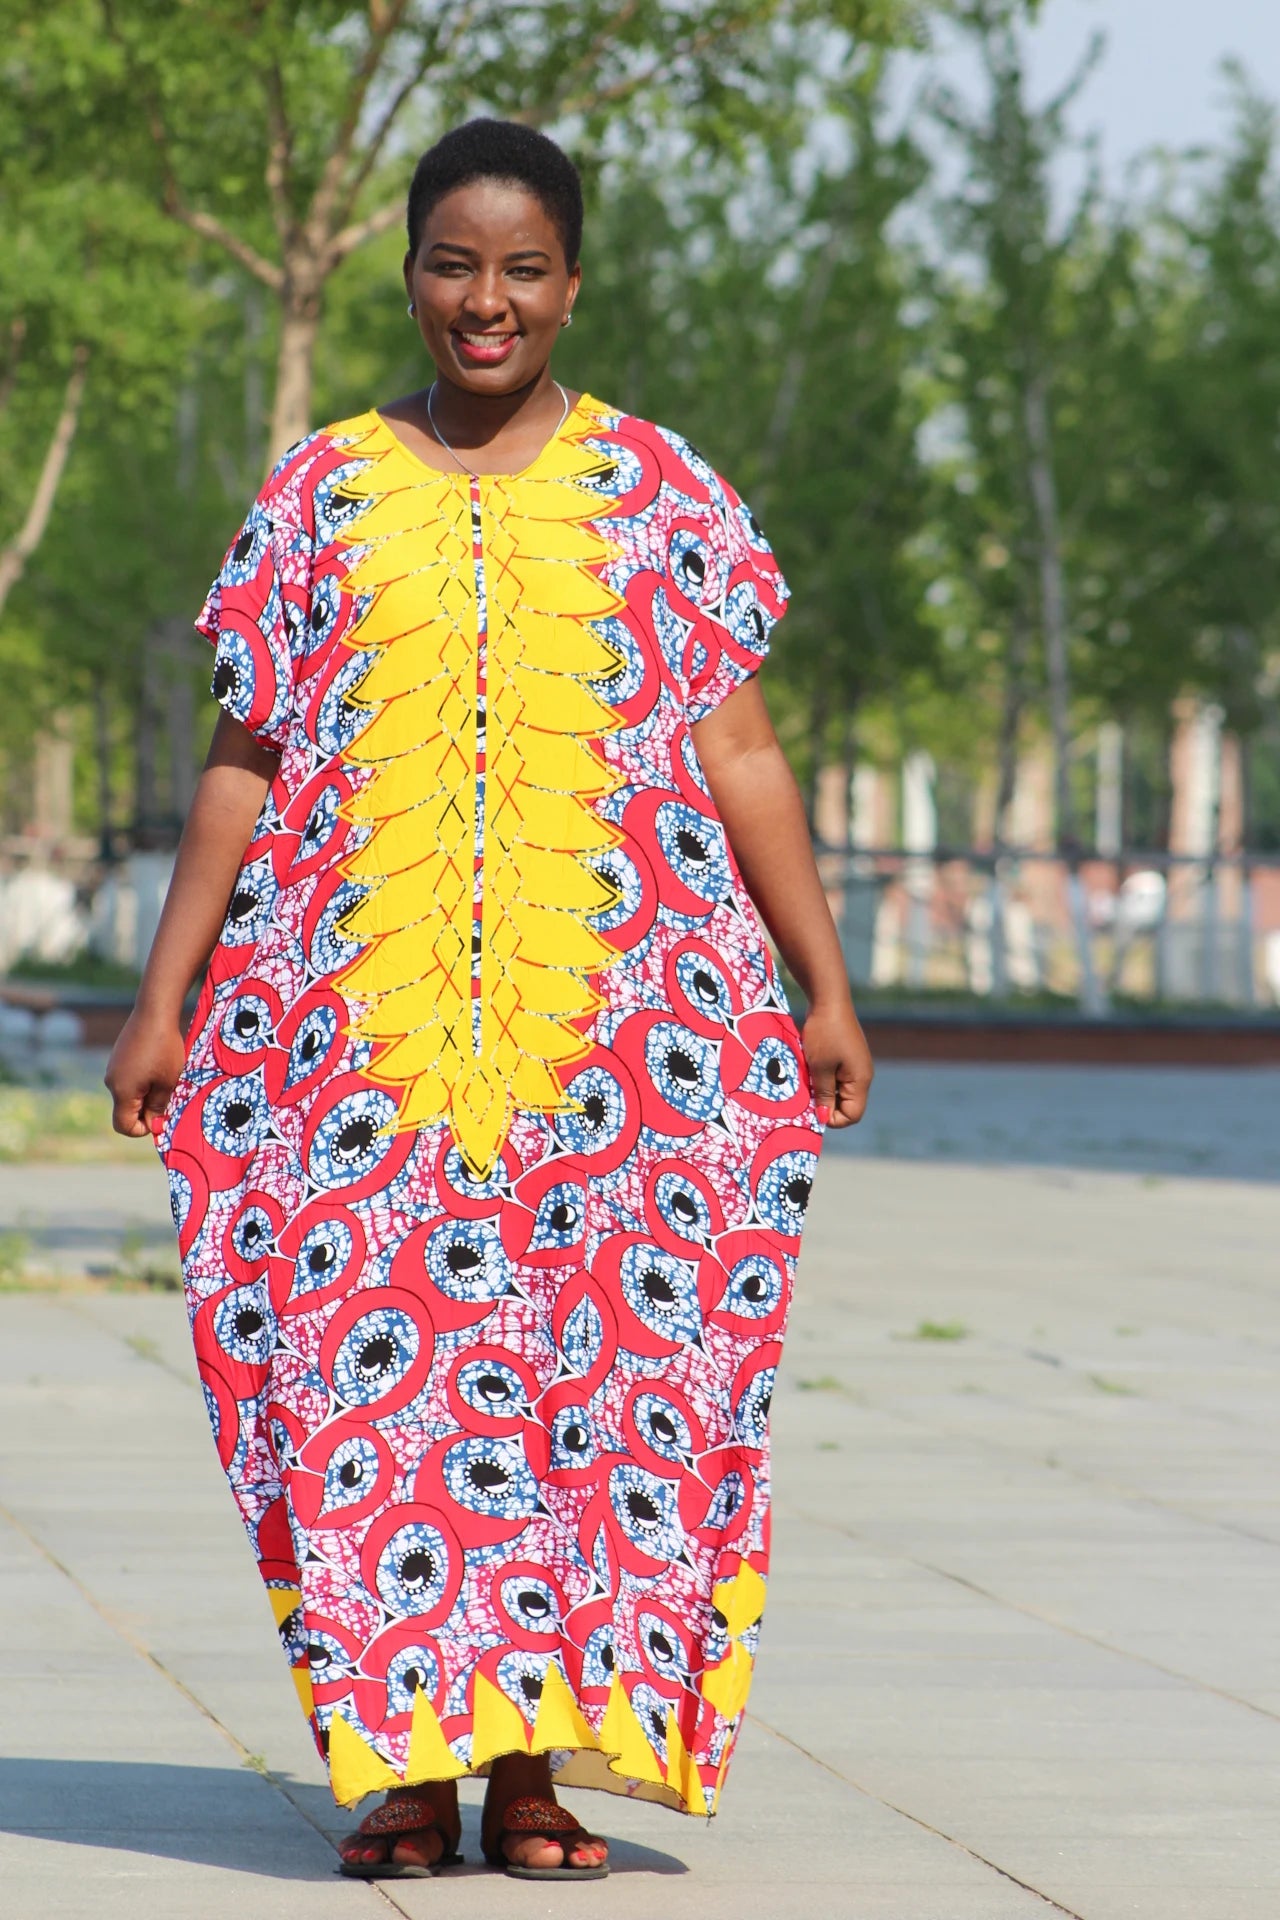 African Vintage women long dress summer 2023 Casual cotton fashion Elegant holiday beach female vestidos festa - Flexi Africa - Flexi Africa offers Free Delivery Worldwide - Vibrant African traditional clothing showcasing bold prints and intricate designs